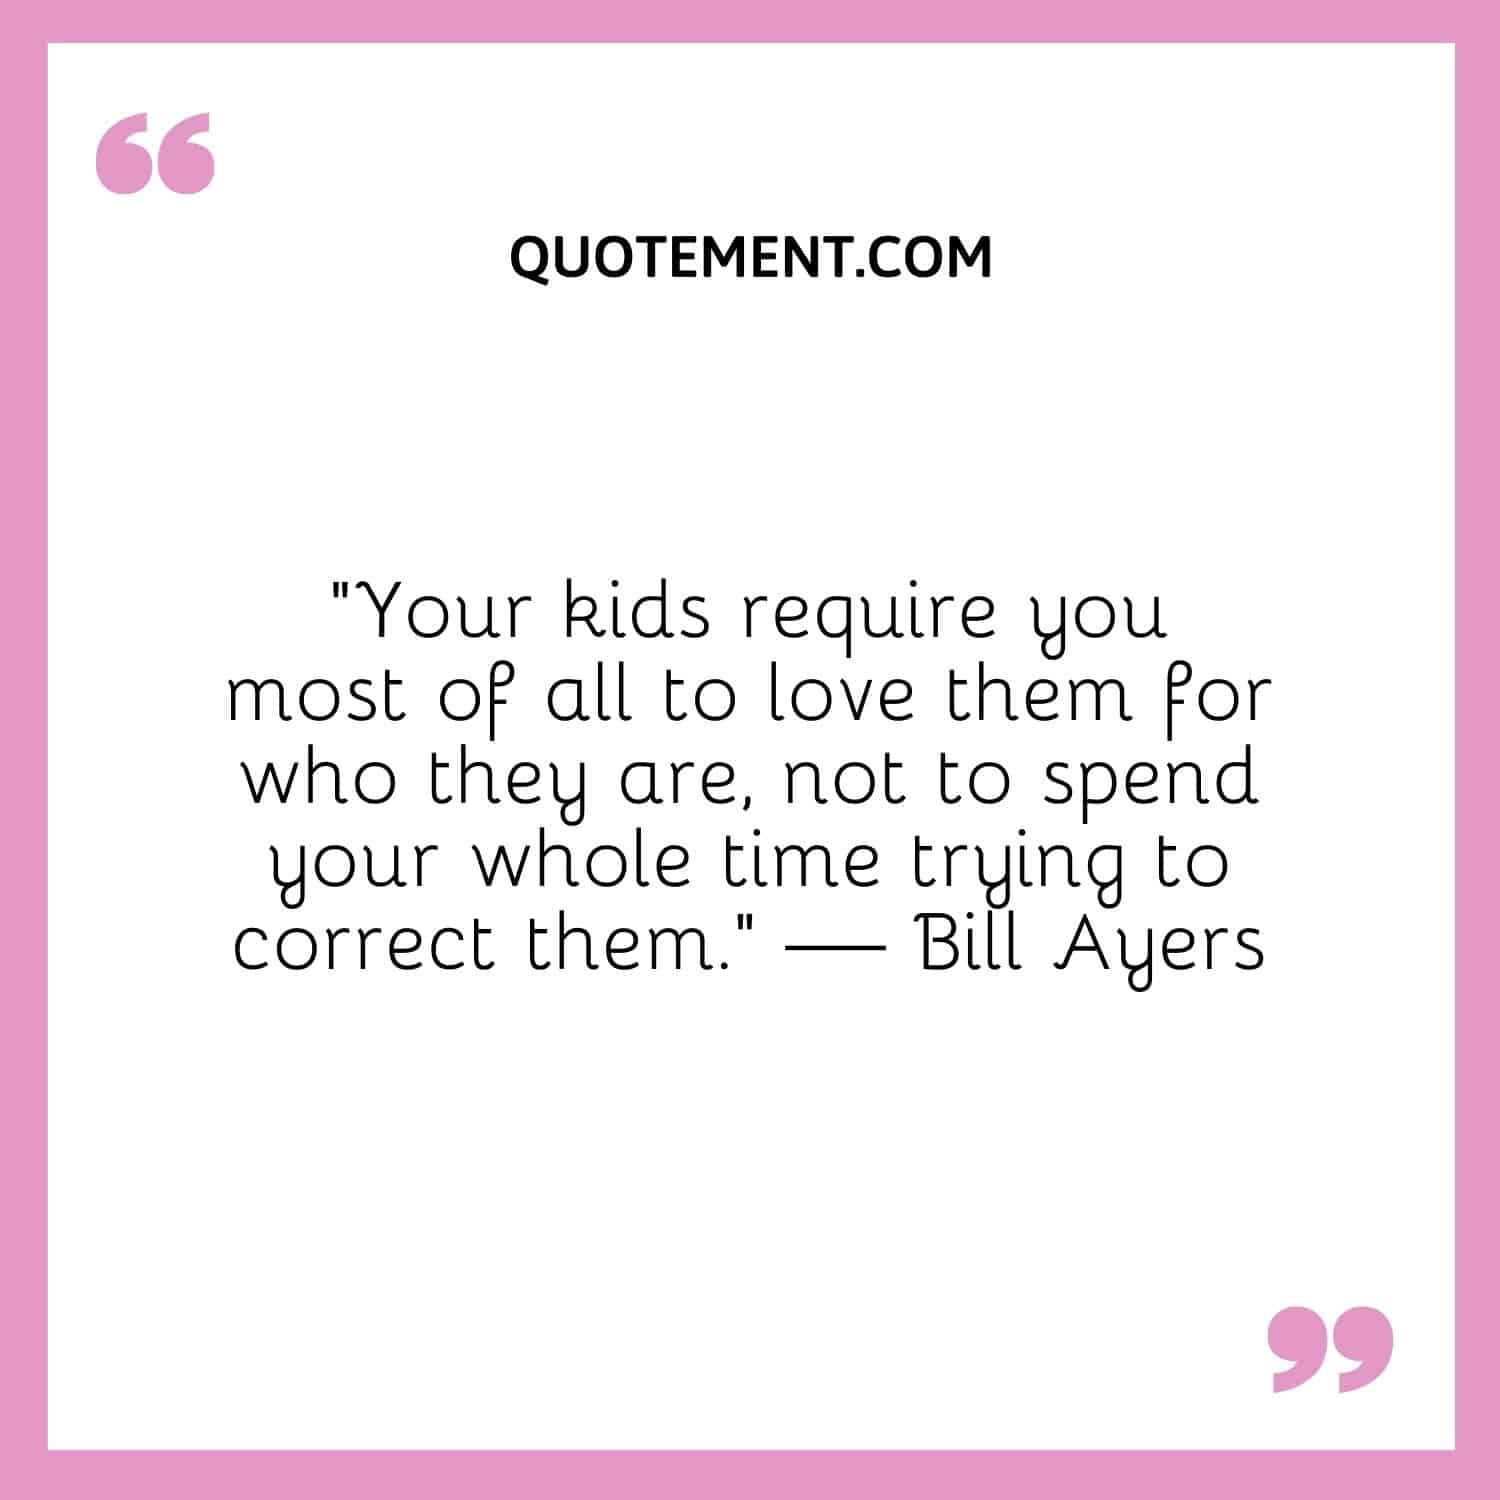 “Your kids require you most of all to love them for who they are, not to spend your whole time trying to correct them.” — Bill Ayers